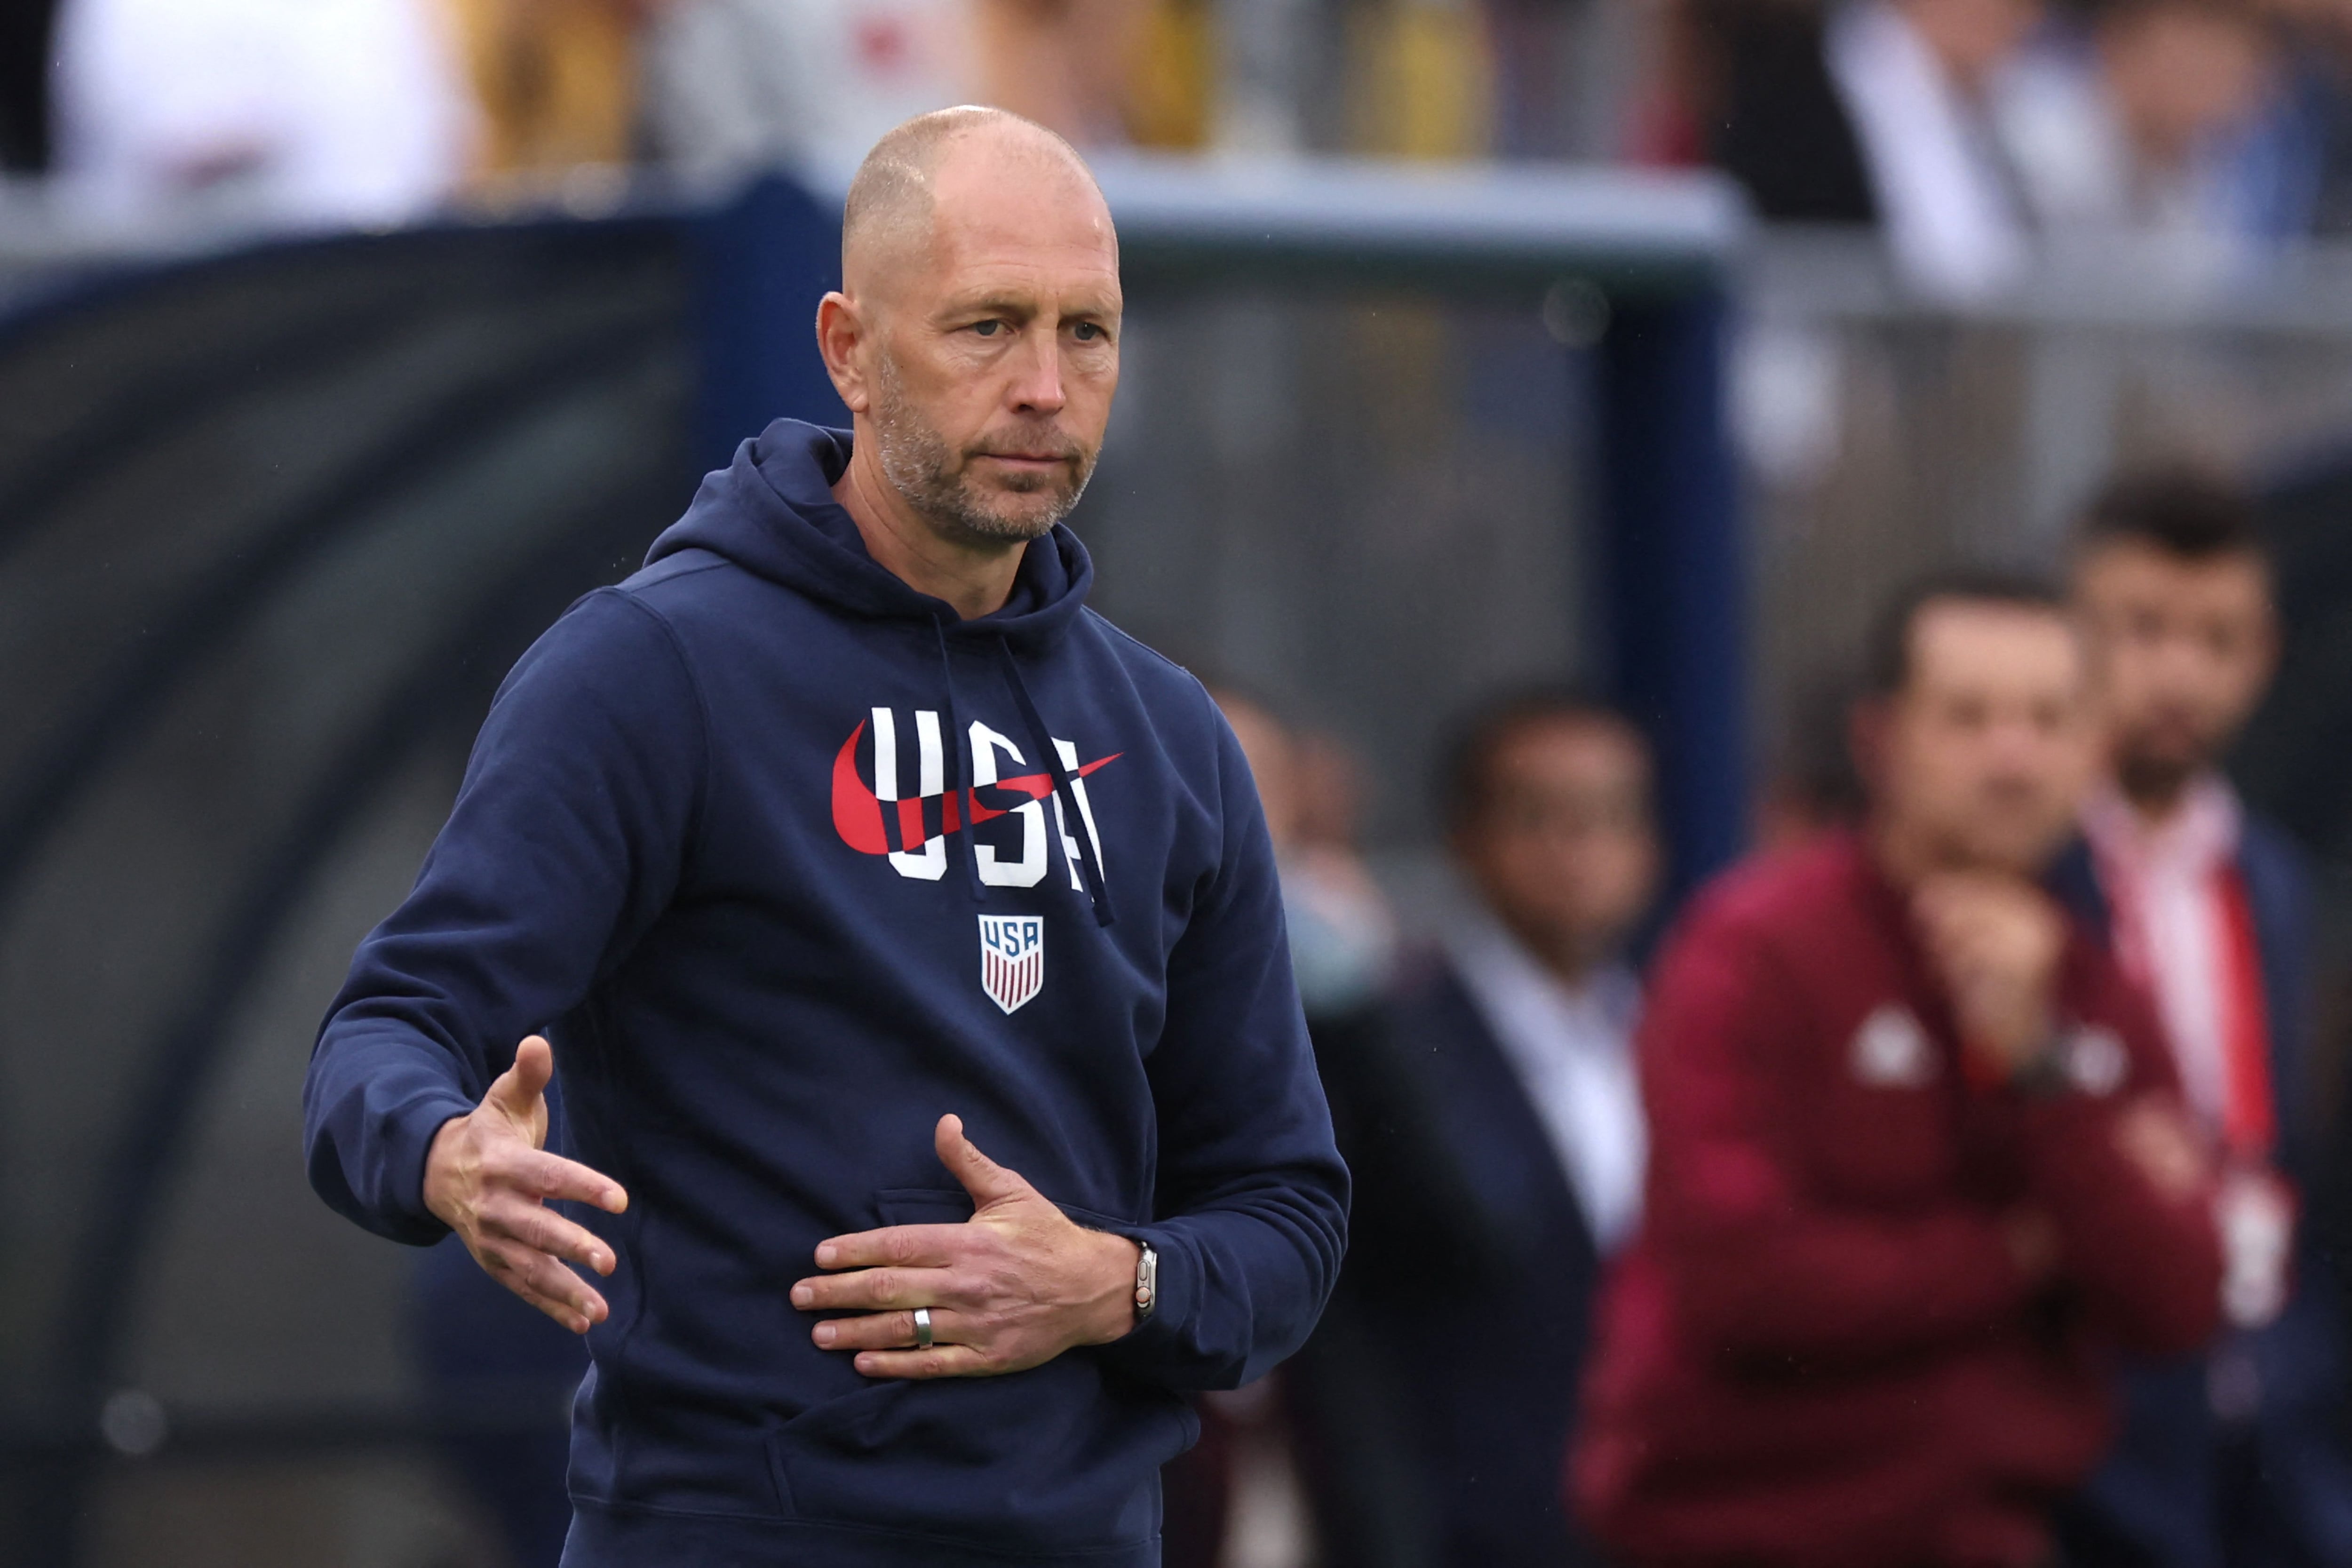 Berhalter on USMNT’s preparation for the World Cup: Nations League, major friendlies, Copa America